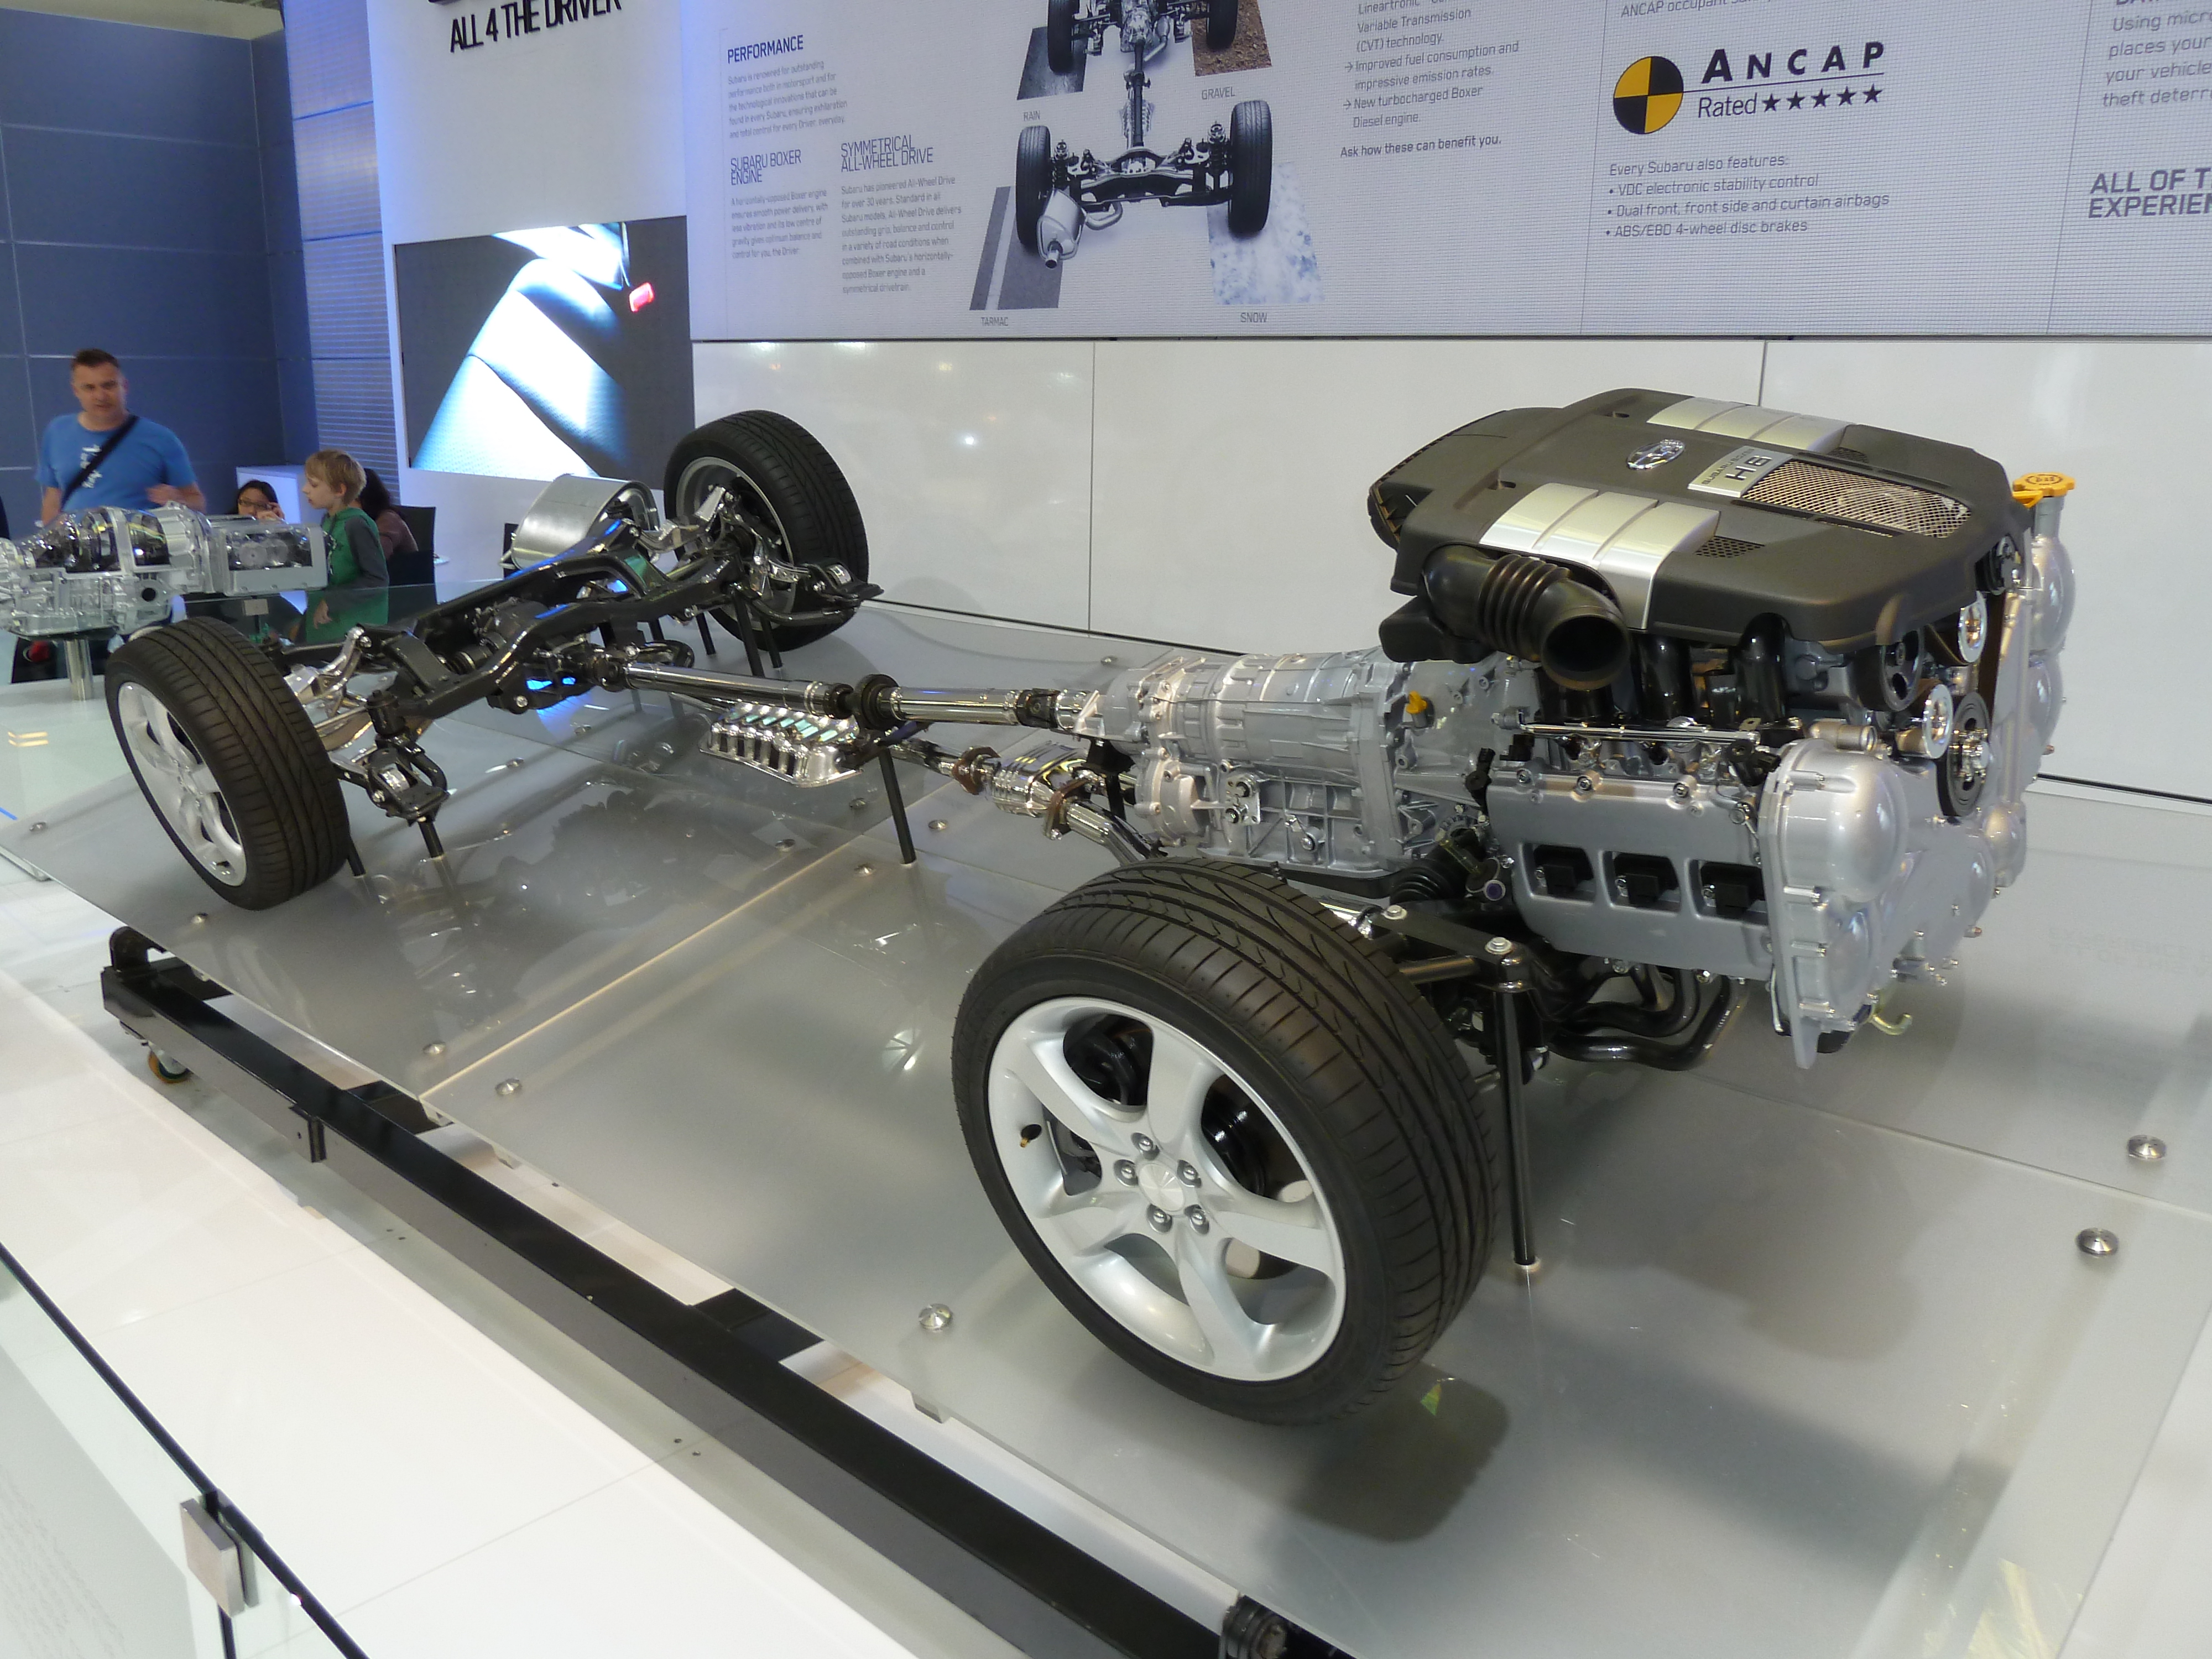 Powertrain Market - Global Industry Trend and Forecast to 2026 Key Players are Continental AG, DENSO CORPORATION, Magna International Inc, Ford Motor Company, Melrose Industries PLC, JTEKT Corporation